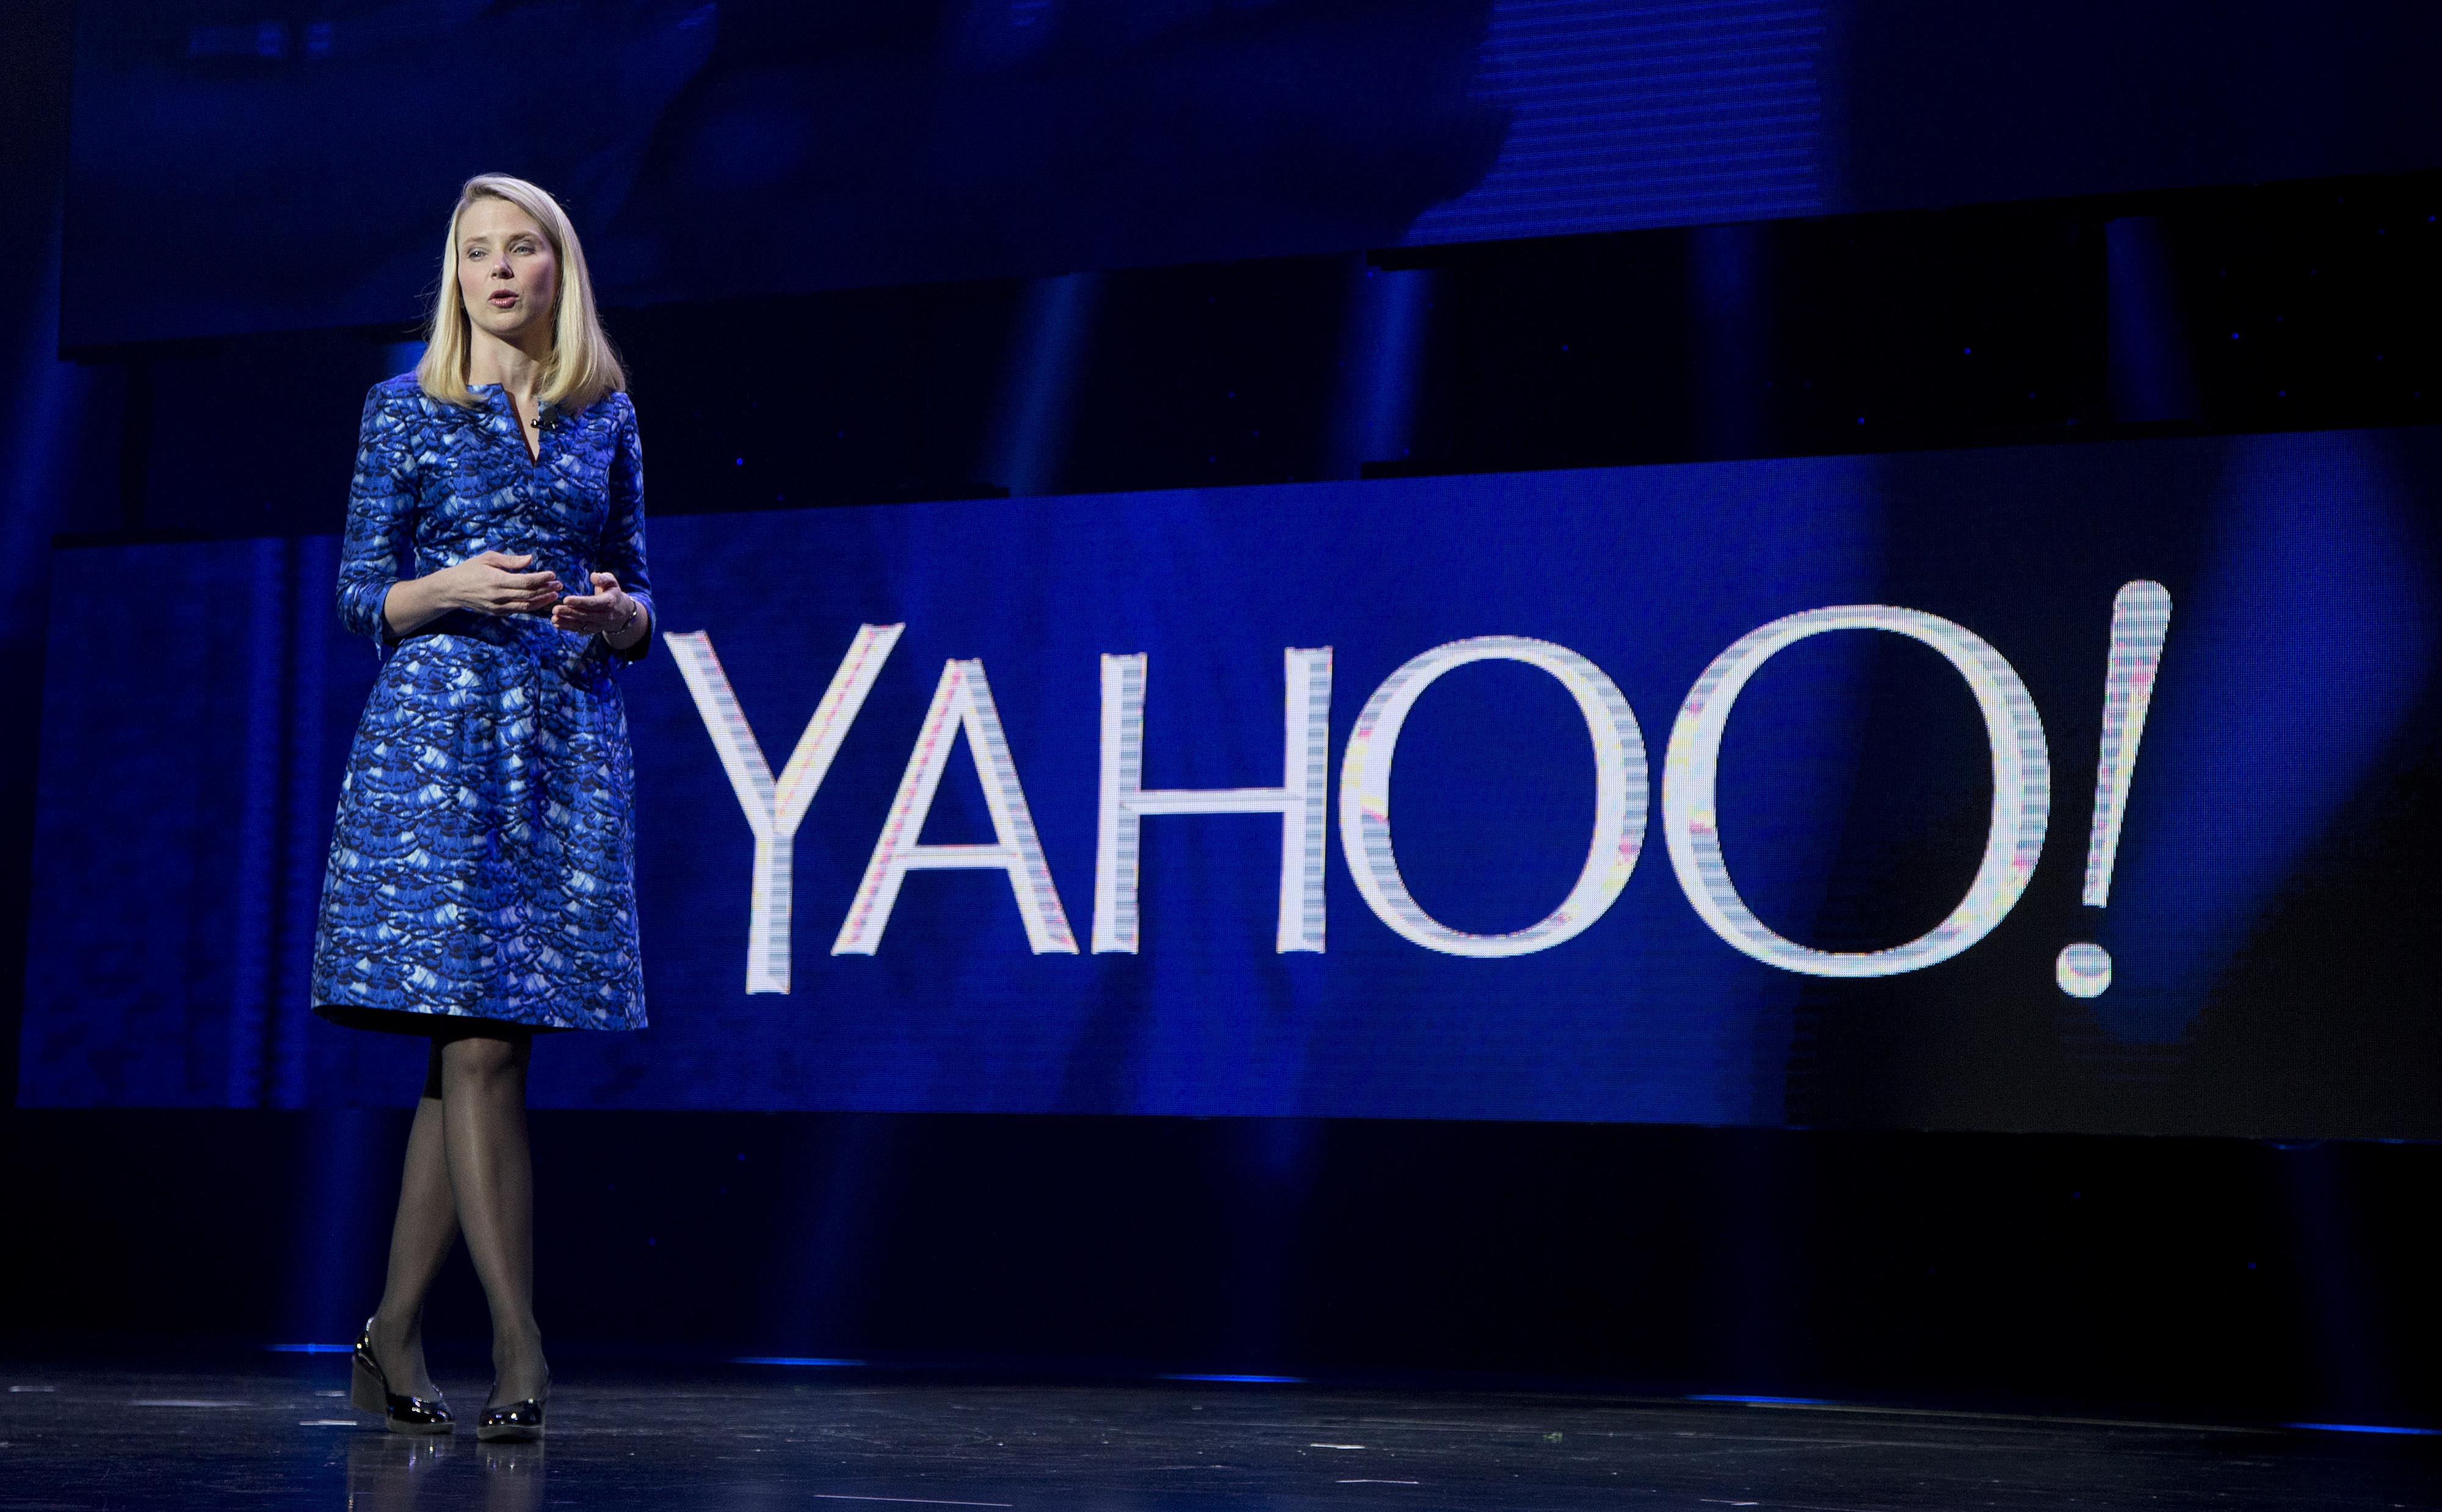 Yahoo president and CEO Marissa Mayer speaks during a keynote address at the International Consumer Electronics Show in Las Vegas in April 2014. Photo: AP